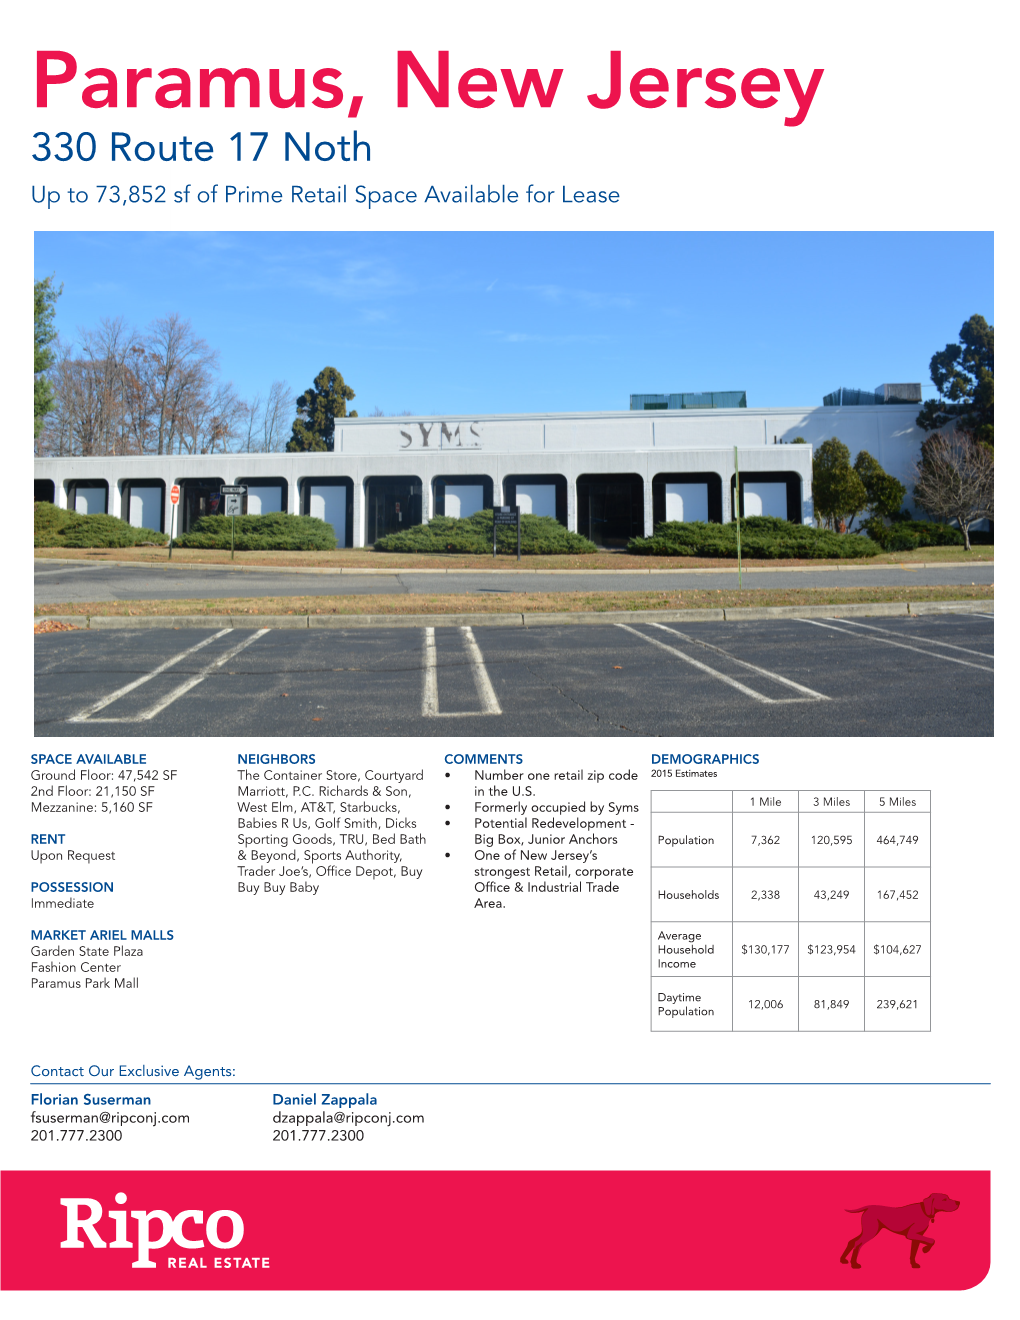 Paramus, New Jersey 330 Route 17 Noth up to 73,852 Sf of Prime Retail Space Available for Lease